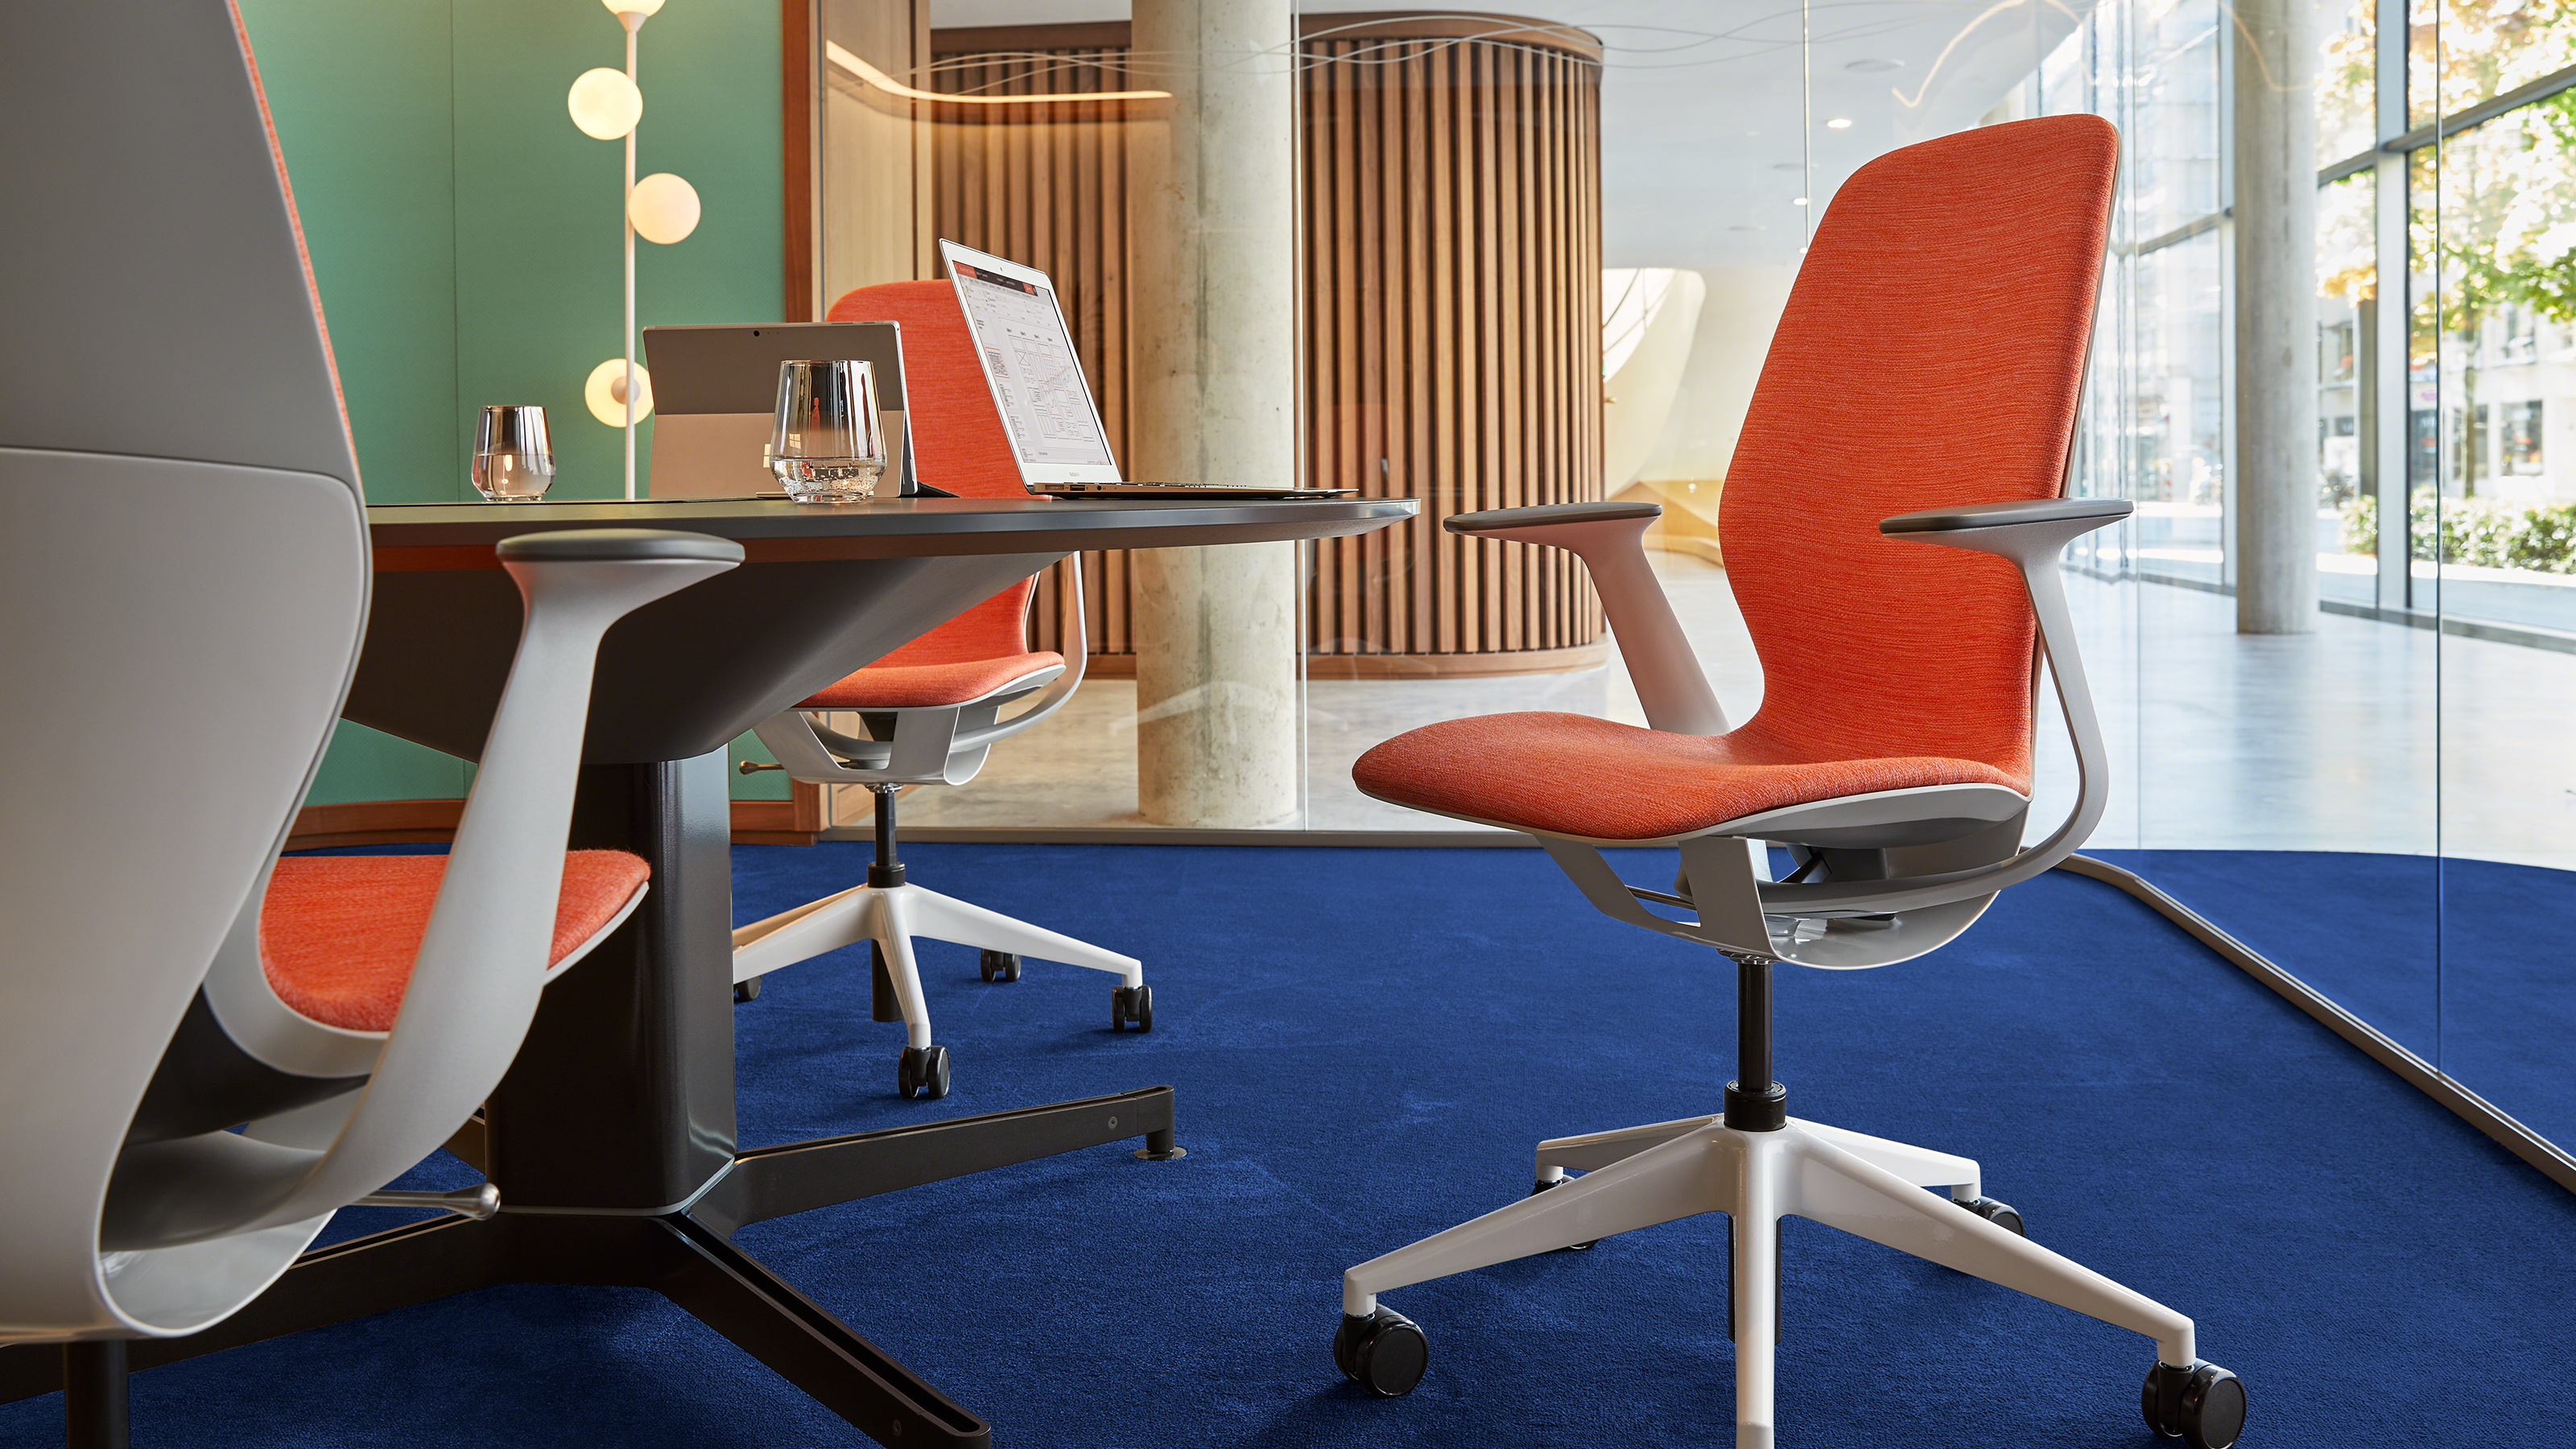 The SILQ office chair by Steelcase